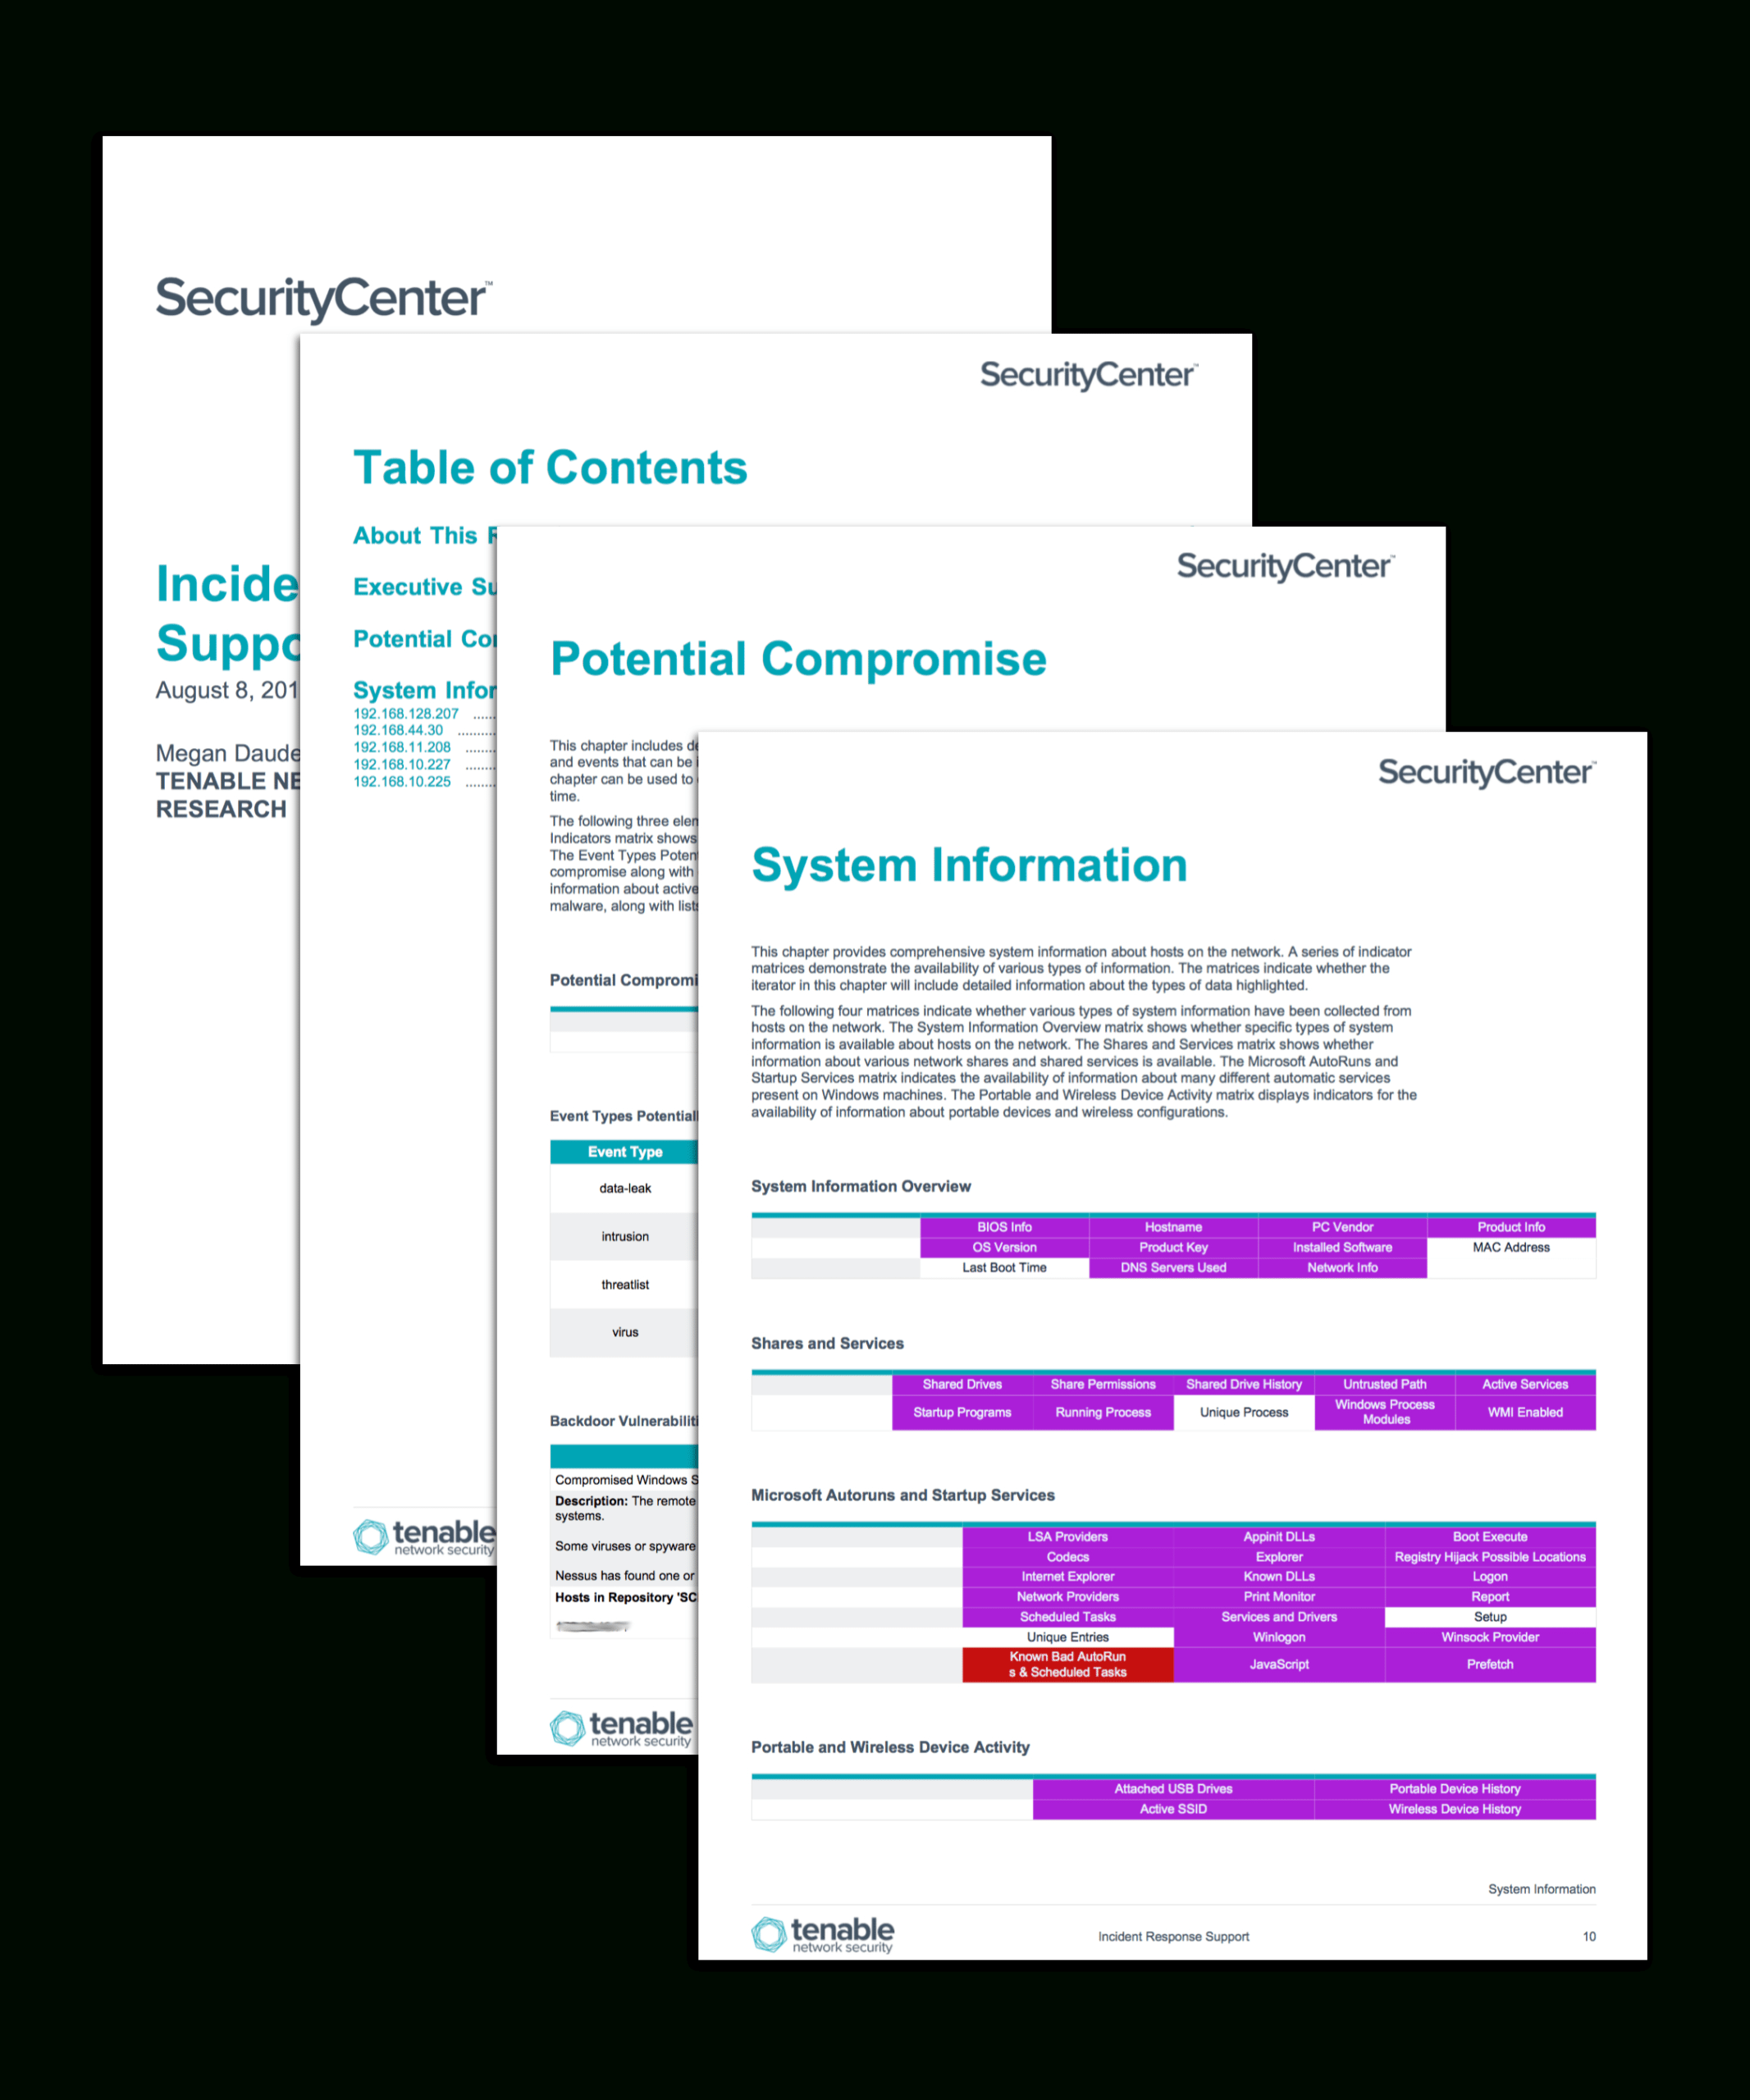 Incident Response Support – Sc Report Template | Tenable® Inside It Support Report Template